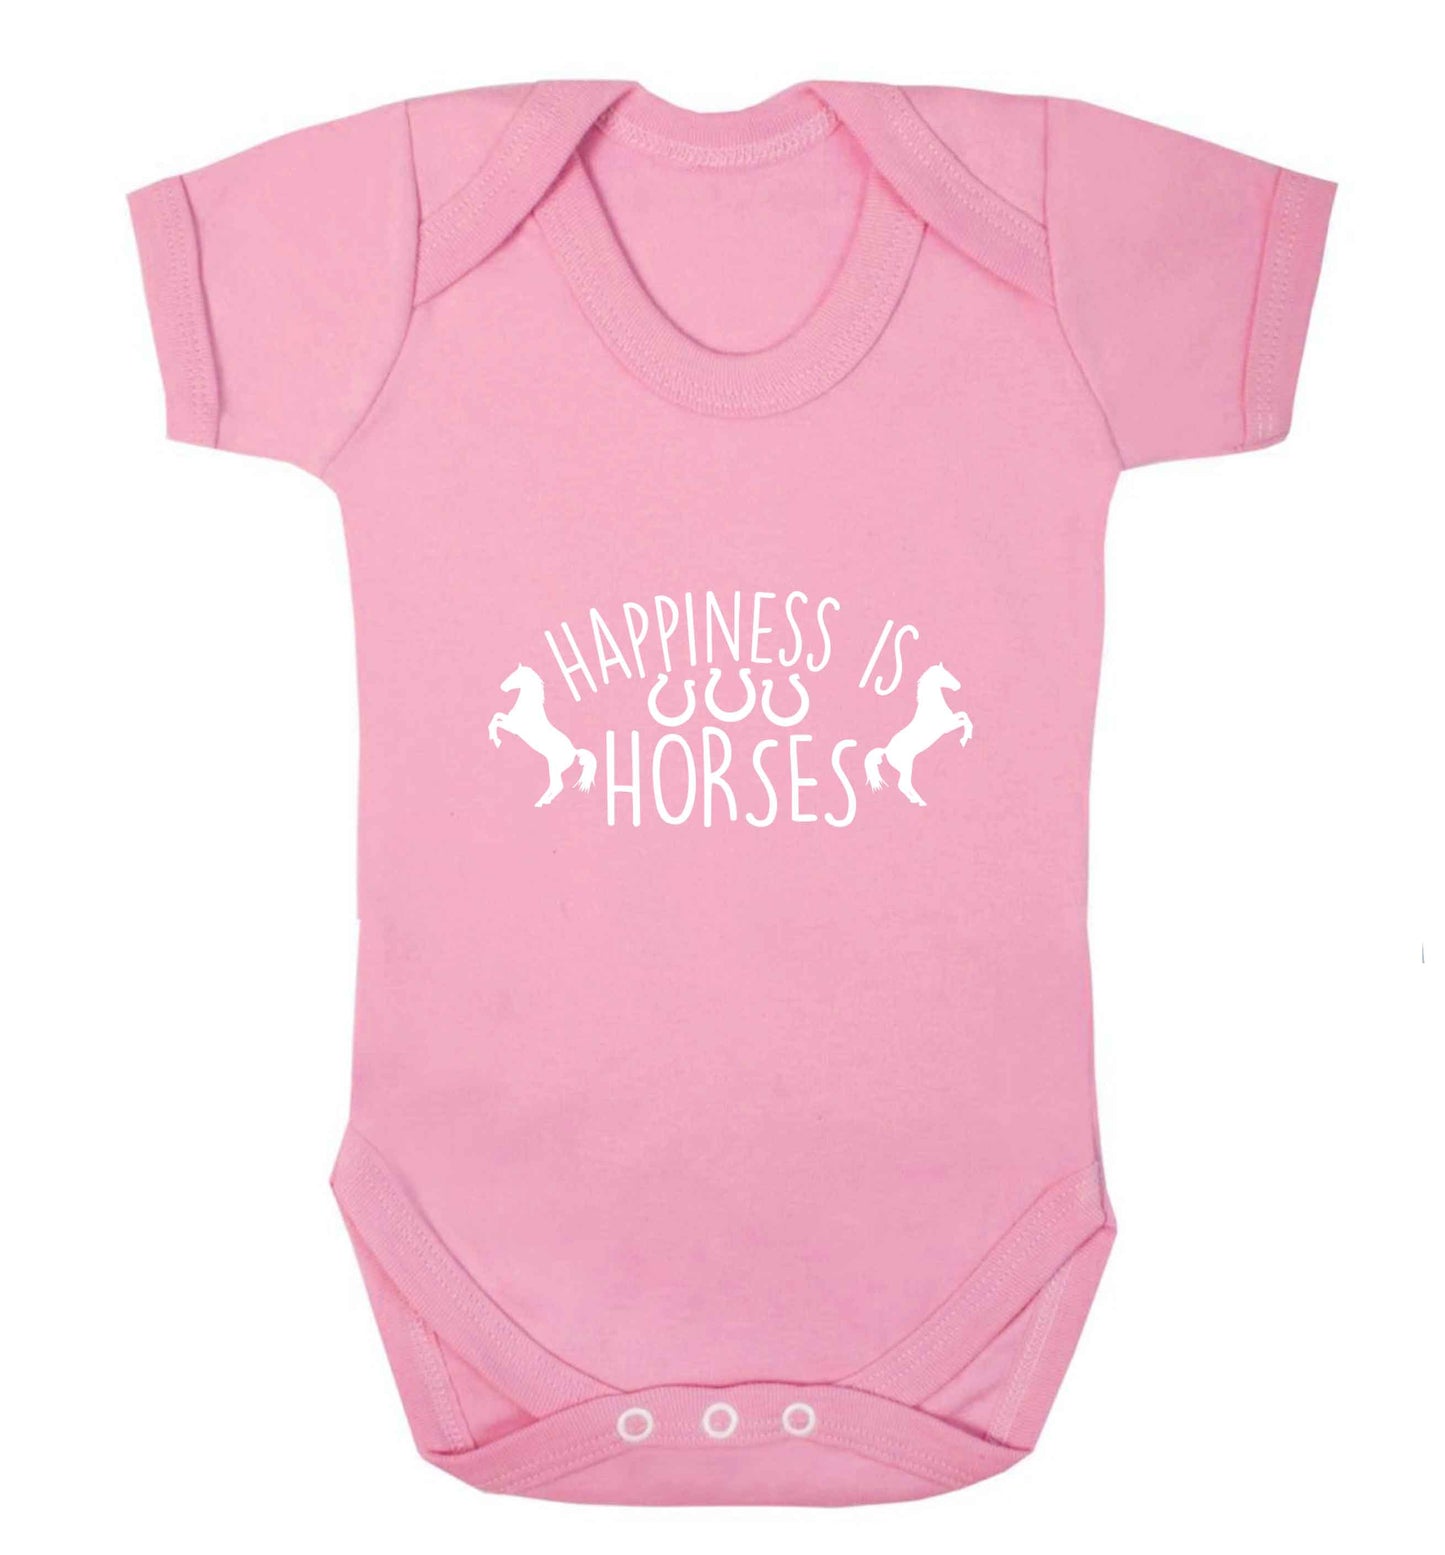 Happiness is horses baby vest pale pink 18-24 months